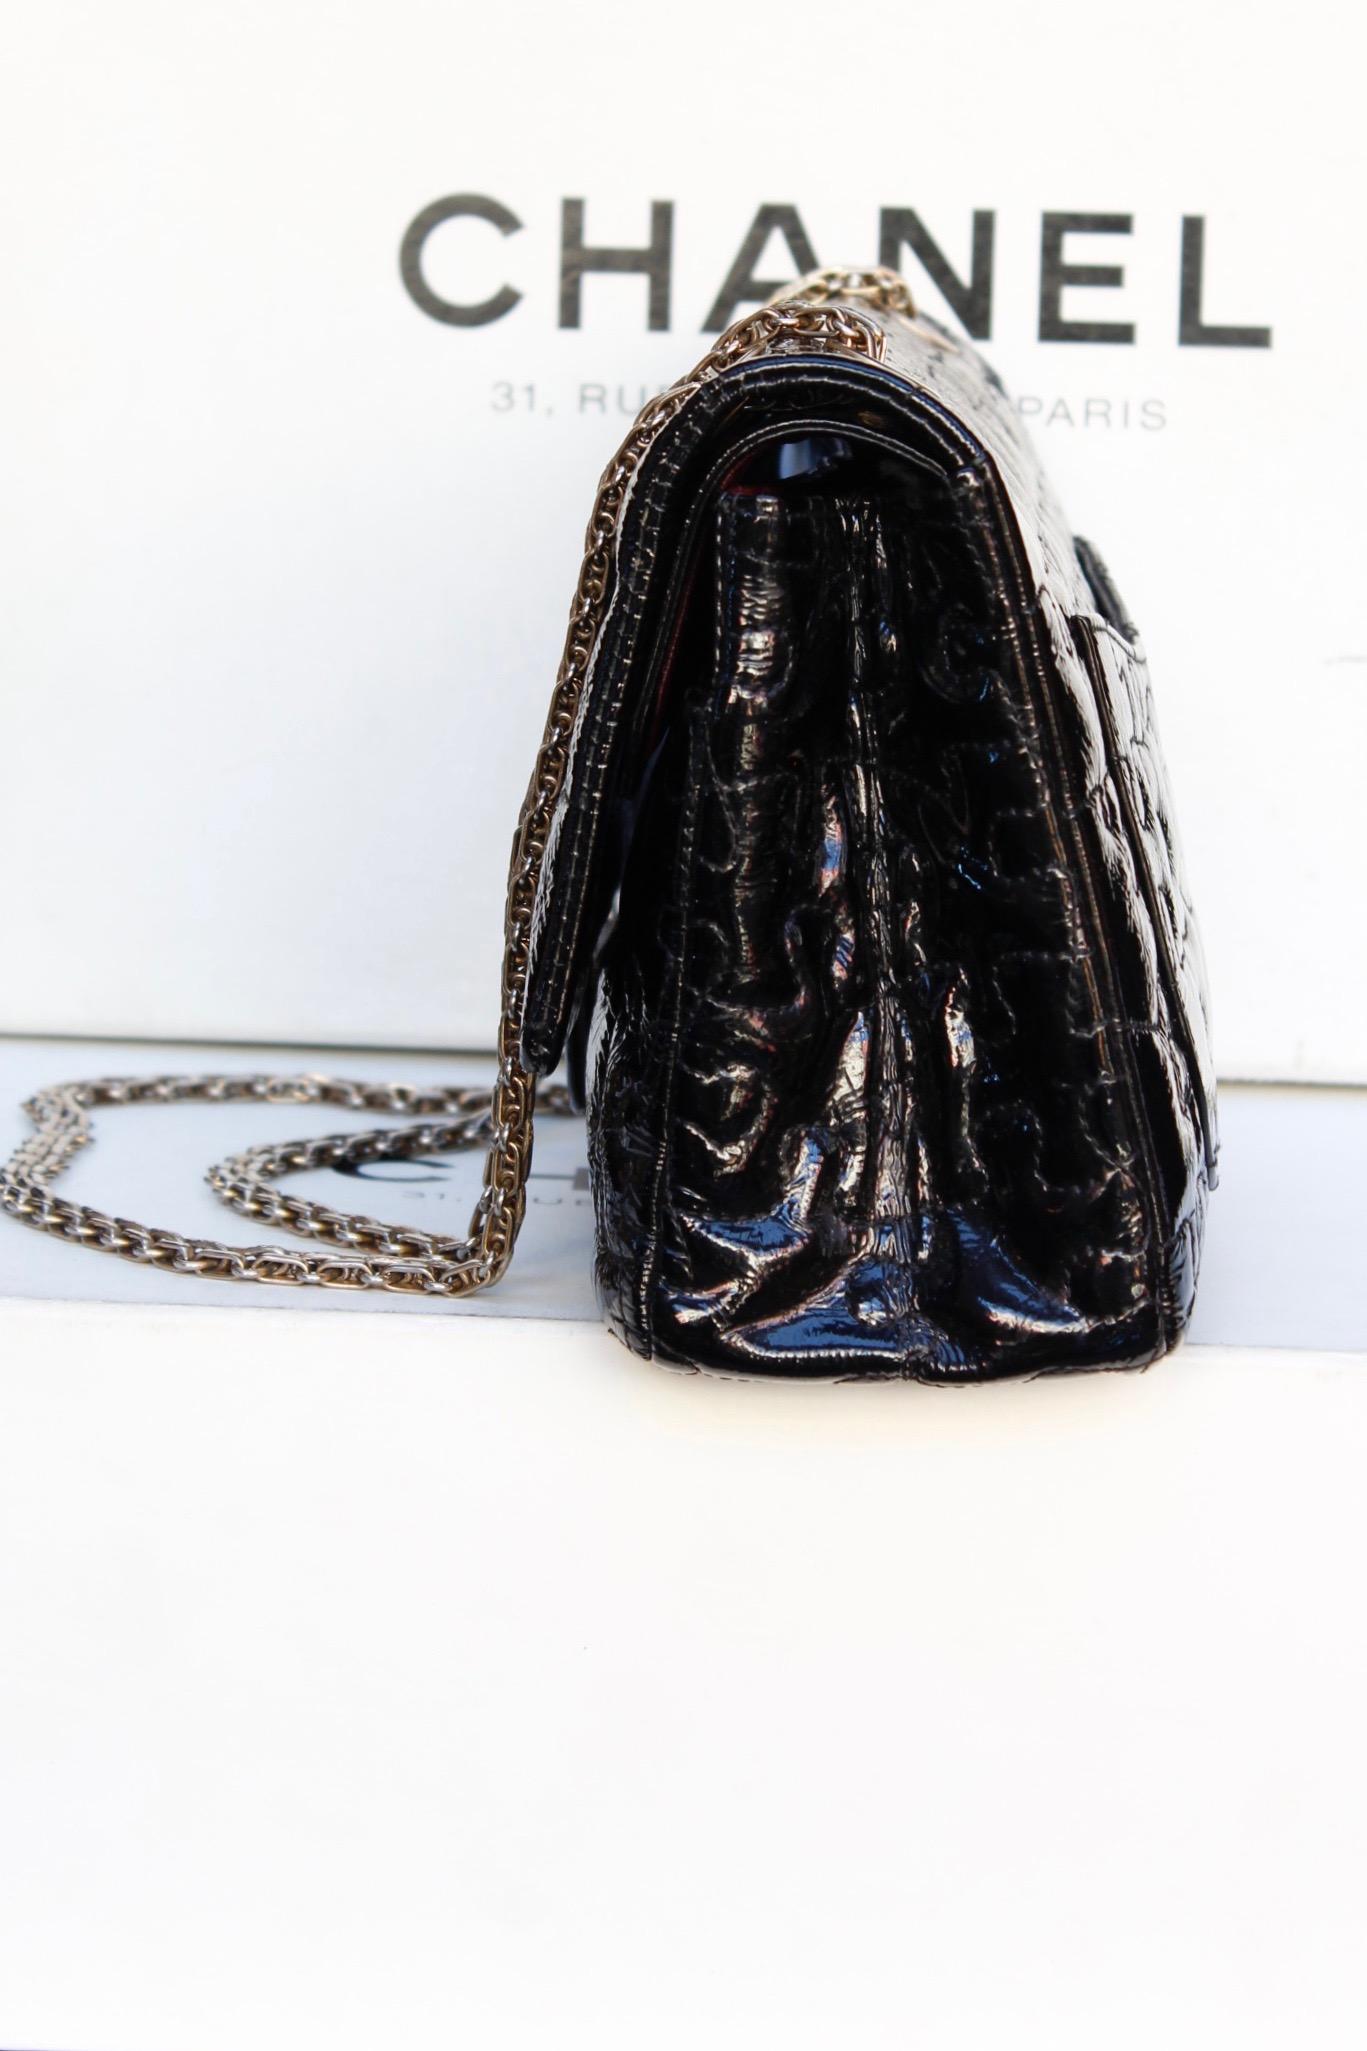 Black Chanel black quilted patent leather”Puzzle” bag model 2.55, 2008-2009 For Sale